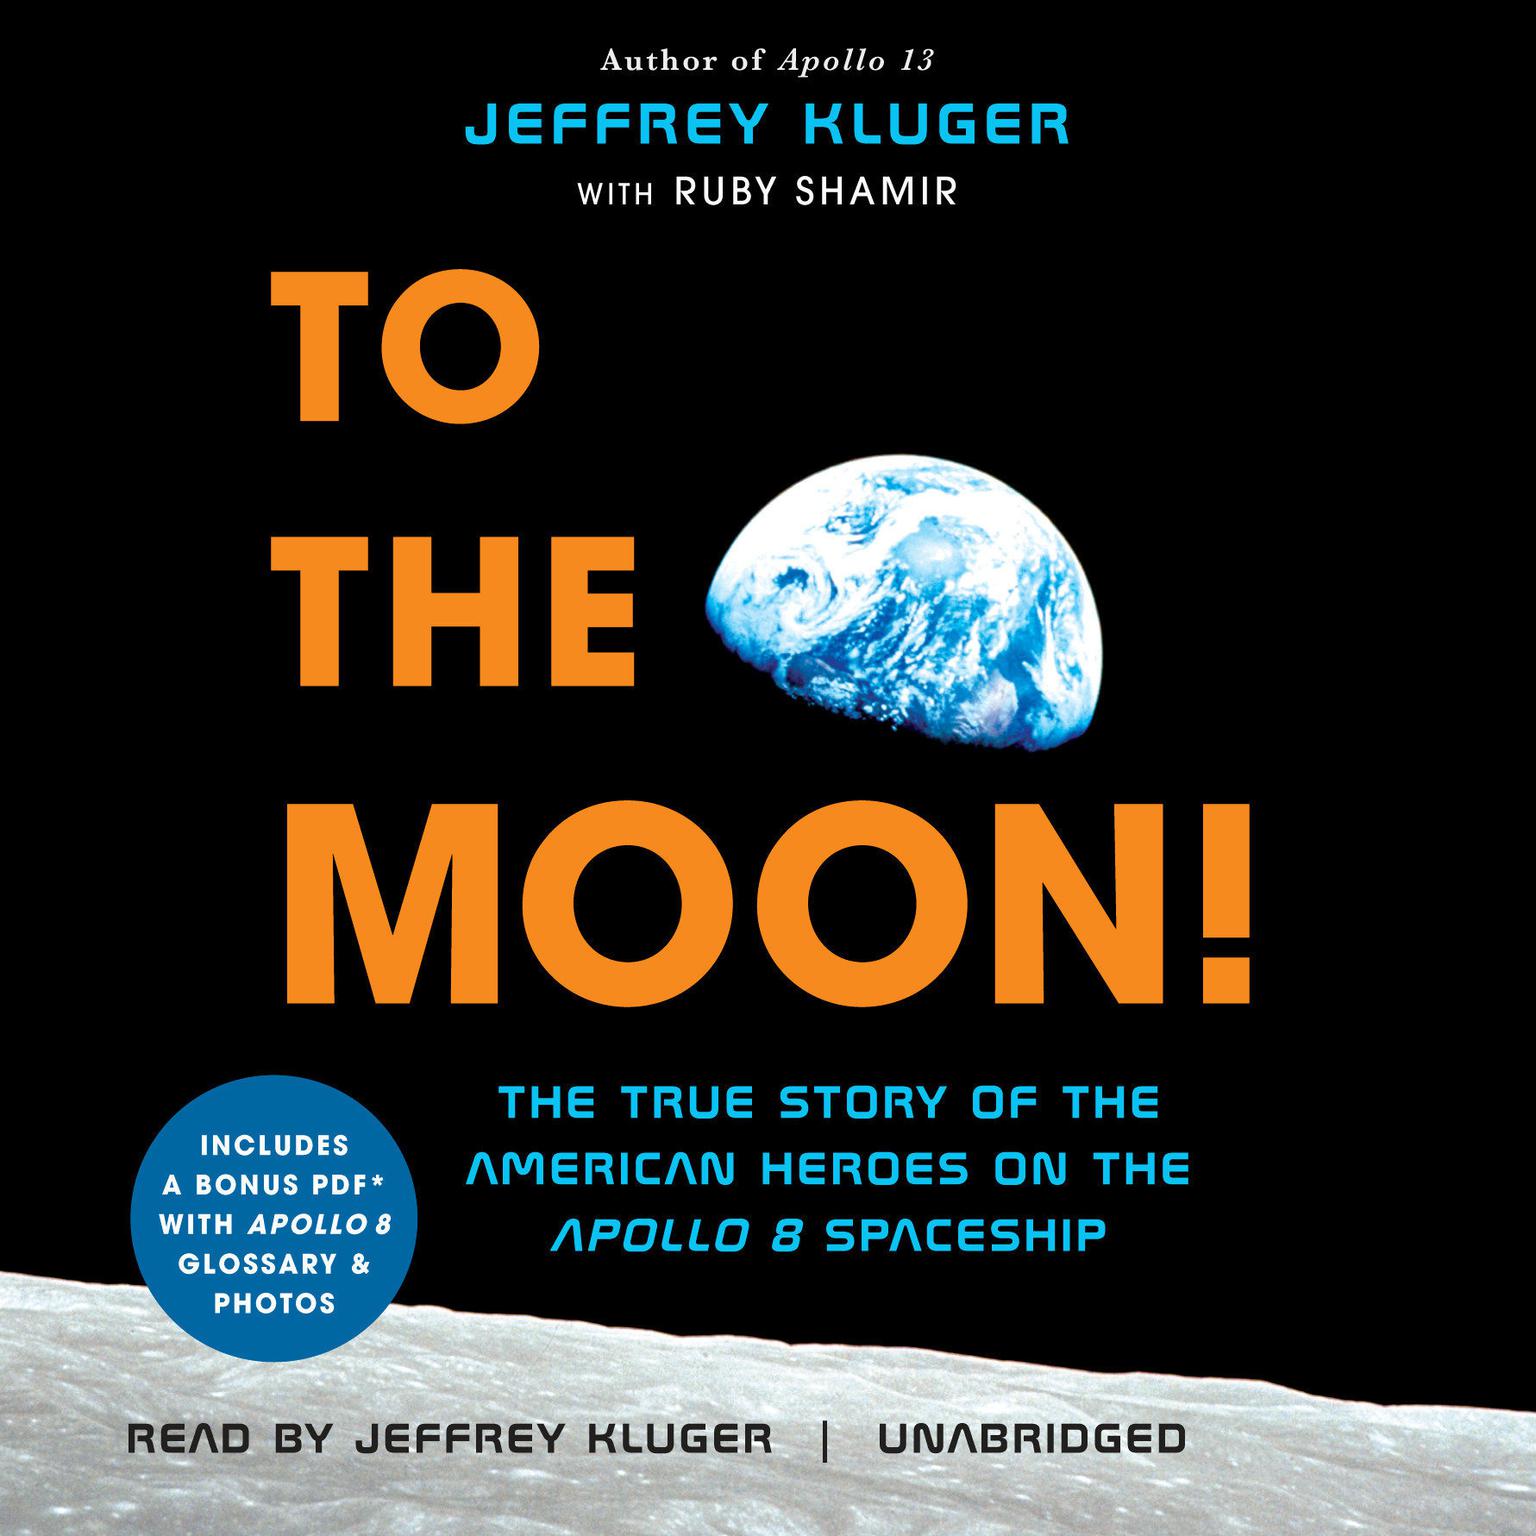 To the Moon!: The True Story of the American Heroes on the Apollo 8 Spaceship Audiobook, by Jeffrey Kluger